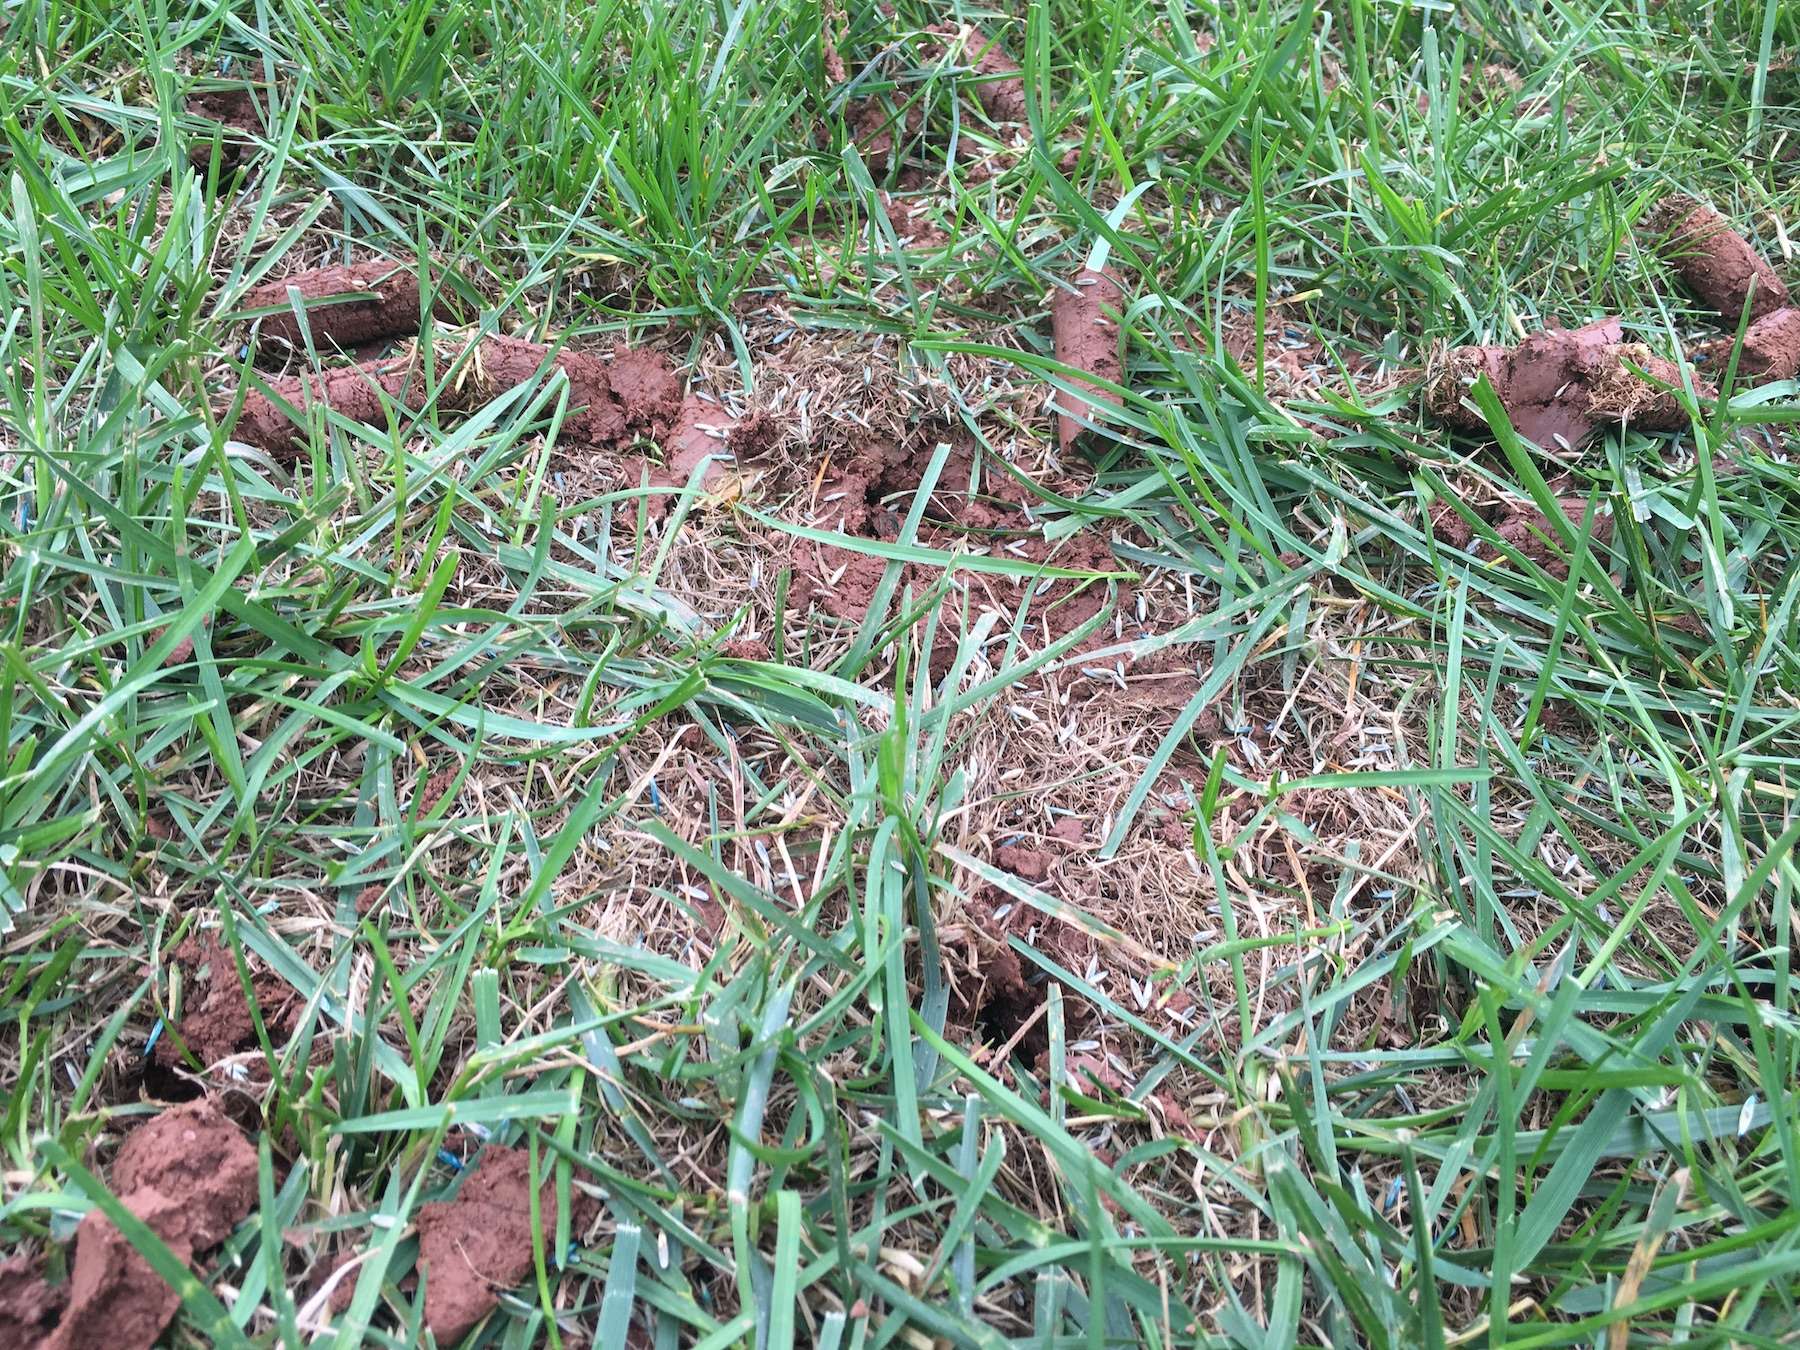 lawn aeration plugs laying in grass with grass seed